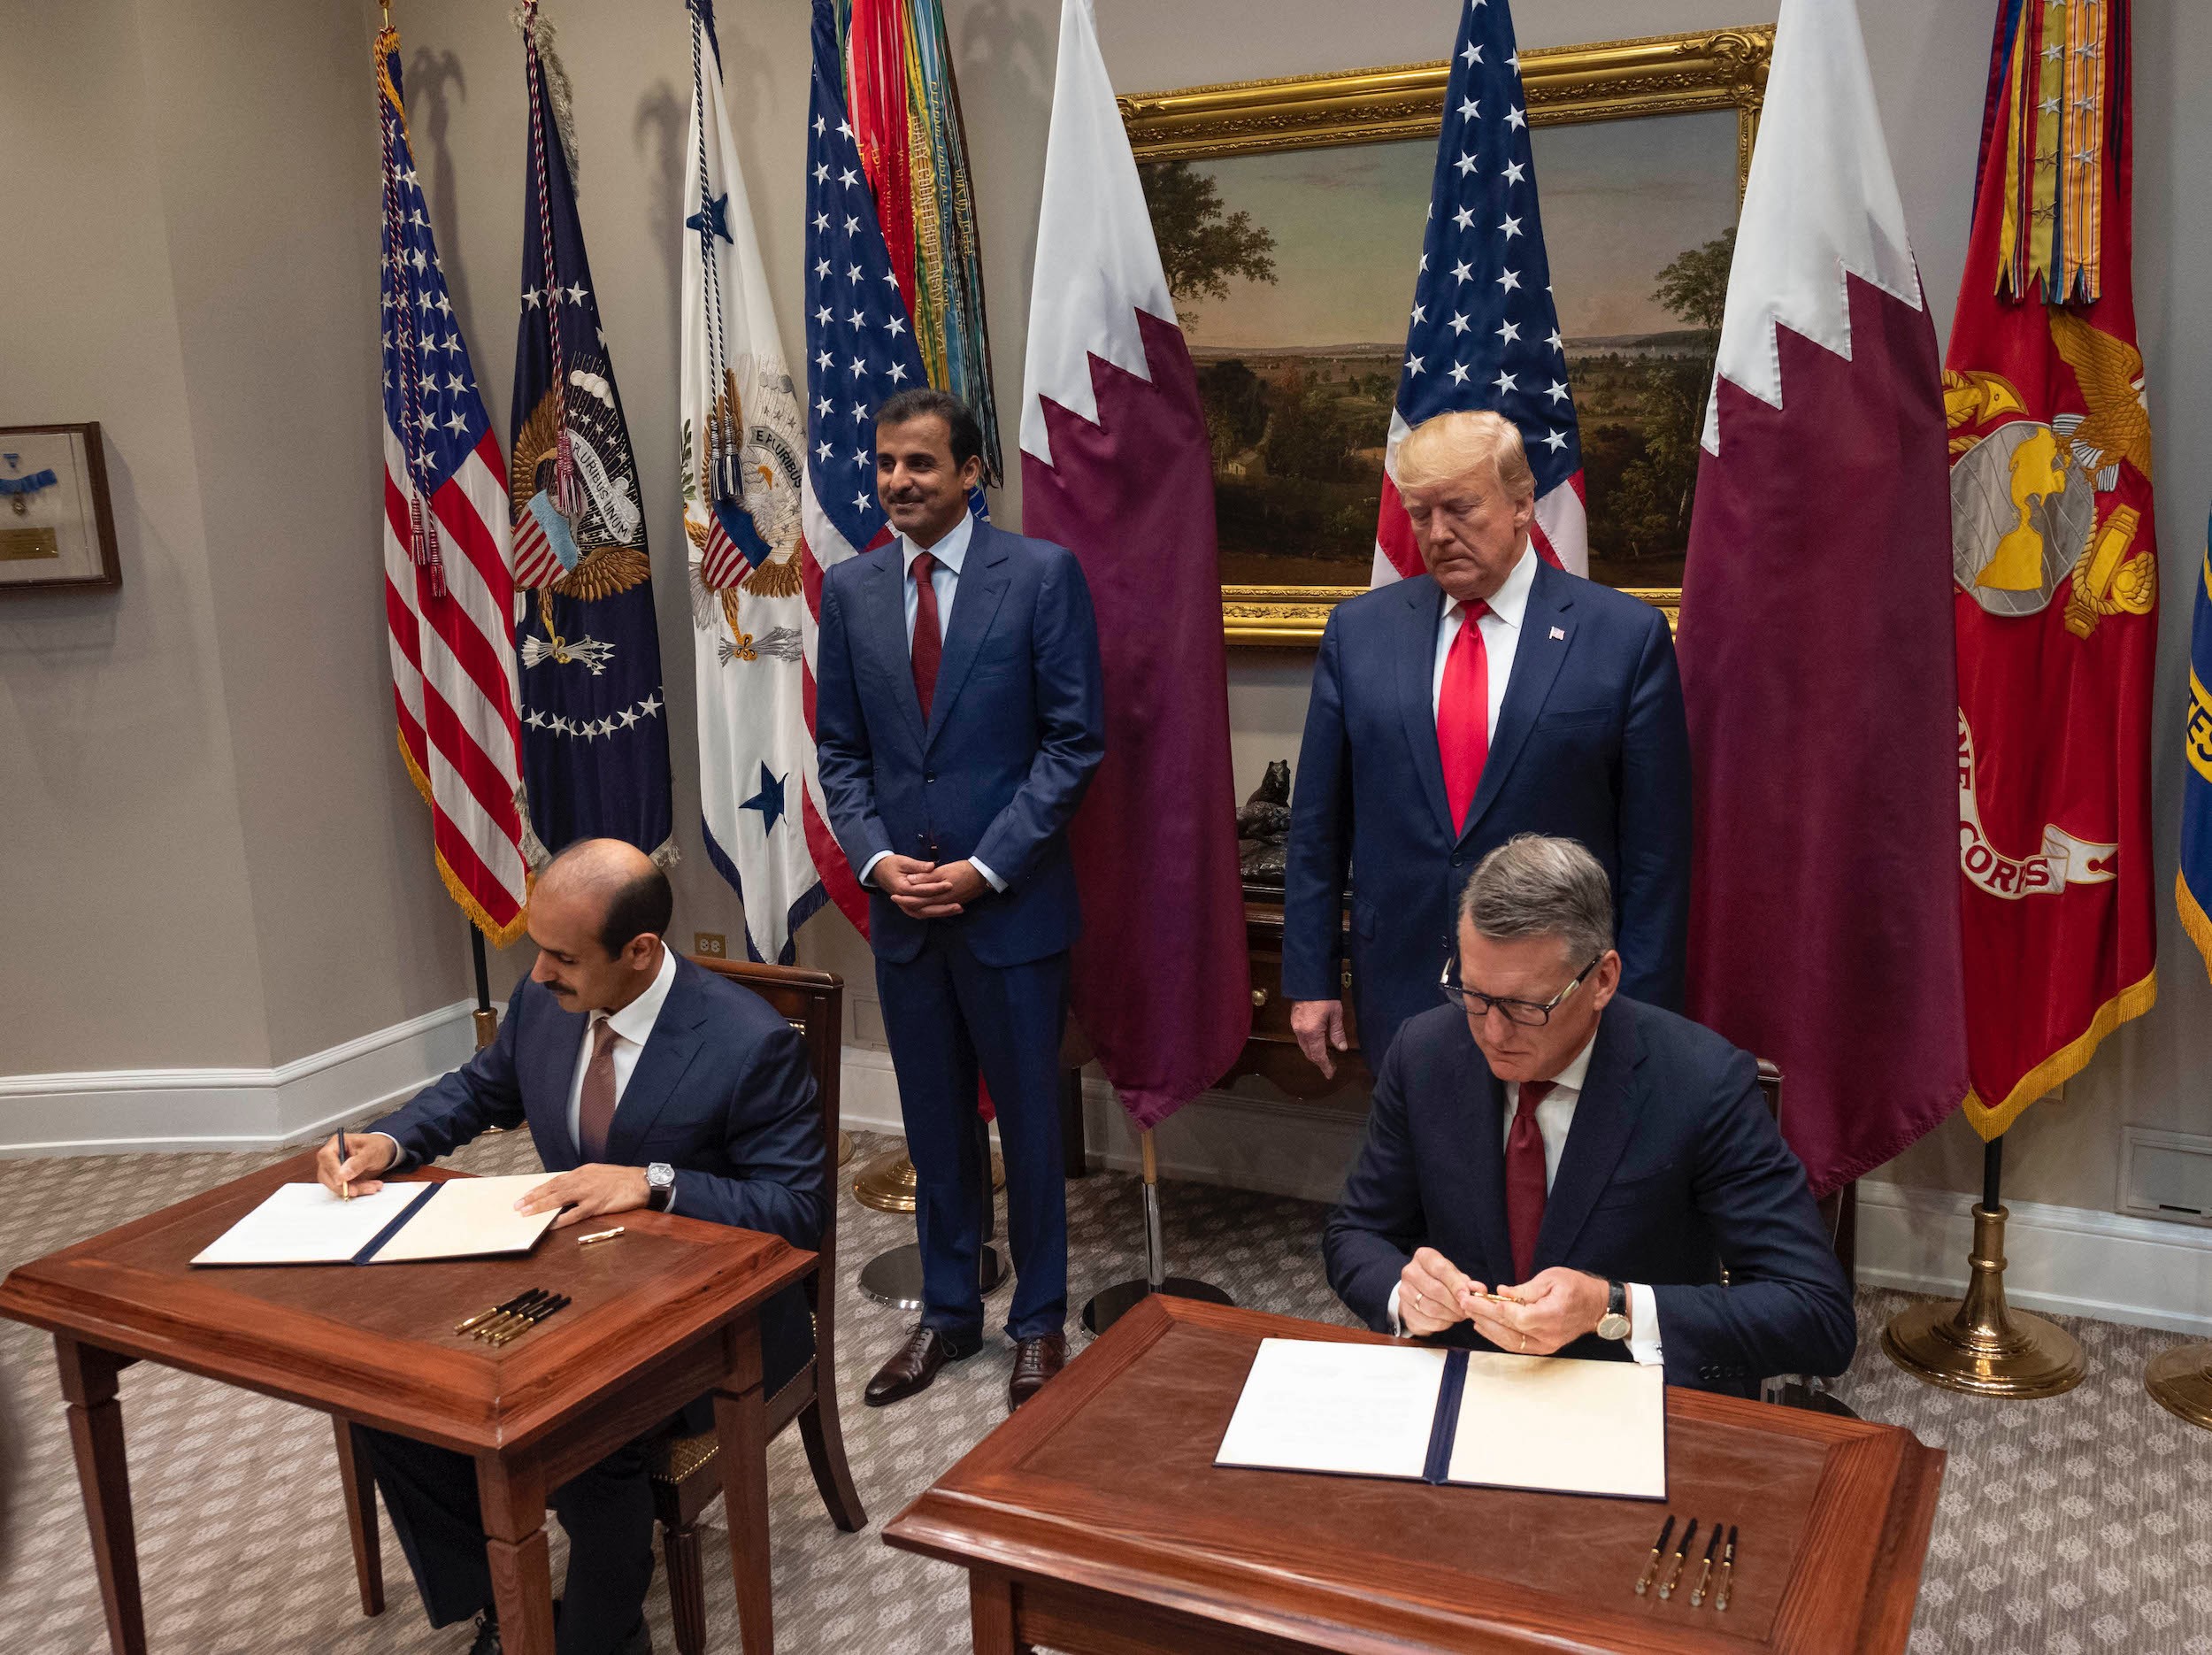  Chevron Phillips Chemical and Qatar Petroleum announce plans to jointly develop U.S. Gulf Coast petrochemical project